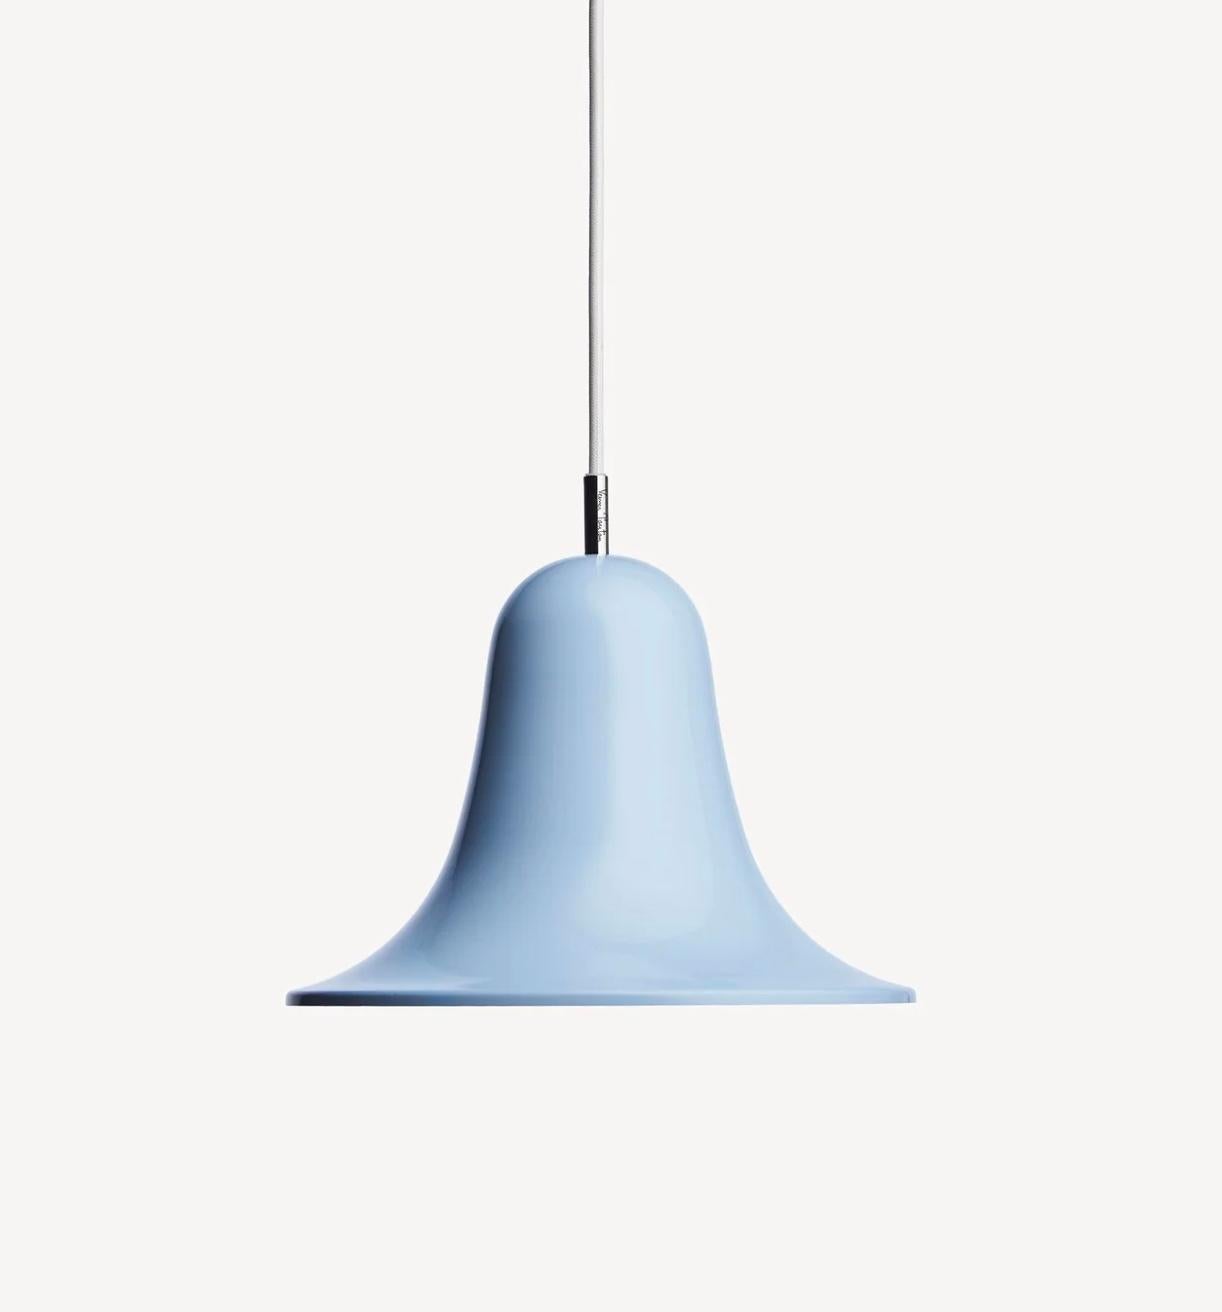 Verner Panton Pantop Ø23 pendant. Designed in 1980, current production.

The elegant Pantop line was designed by Verner Panton in 1980, and has for a long time been a staple of the Verpan collection. Pantop is characterized by a bell-like, widely